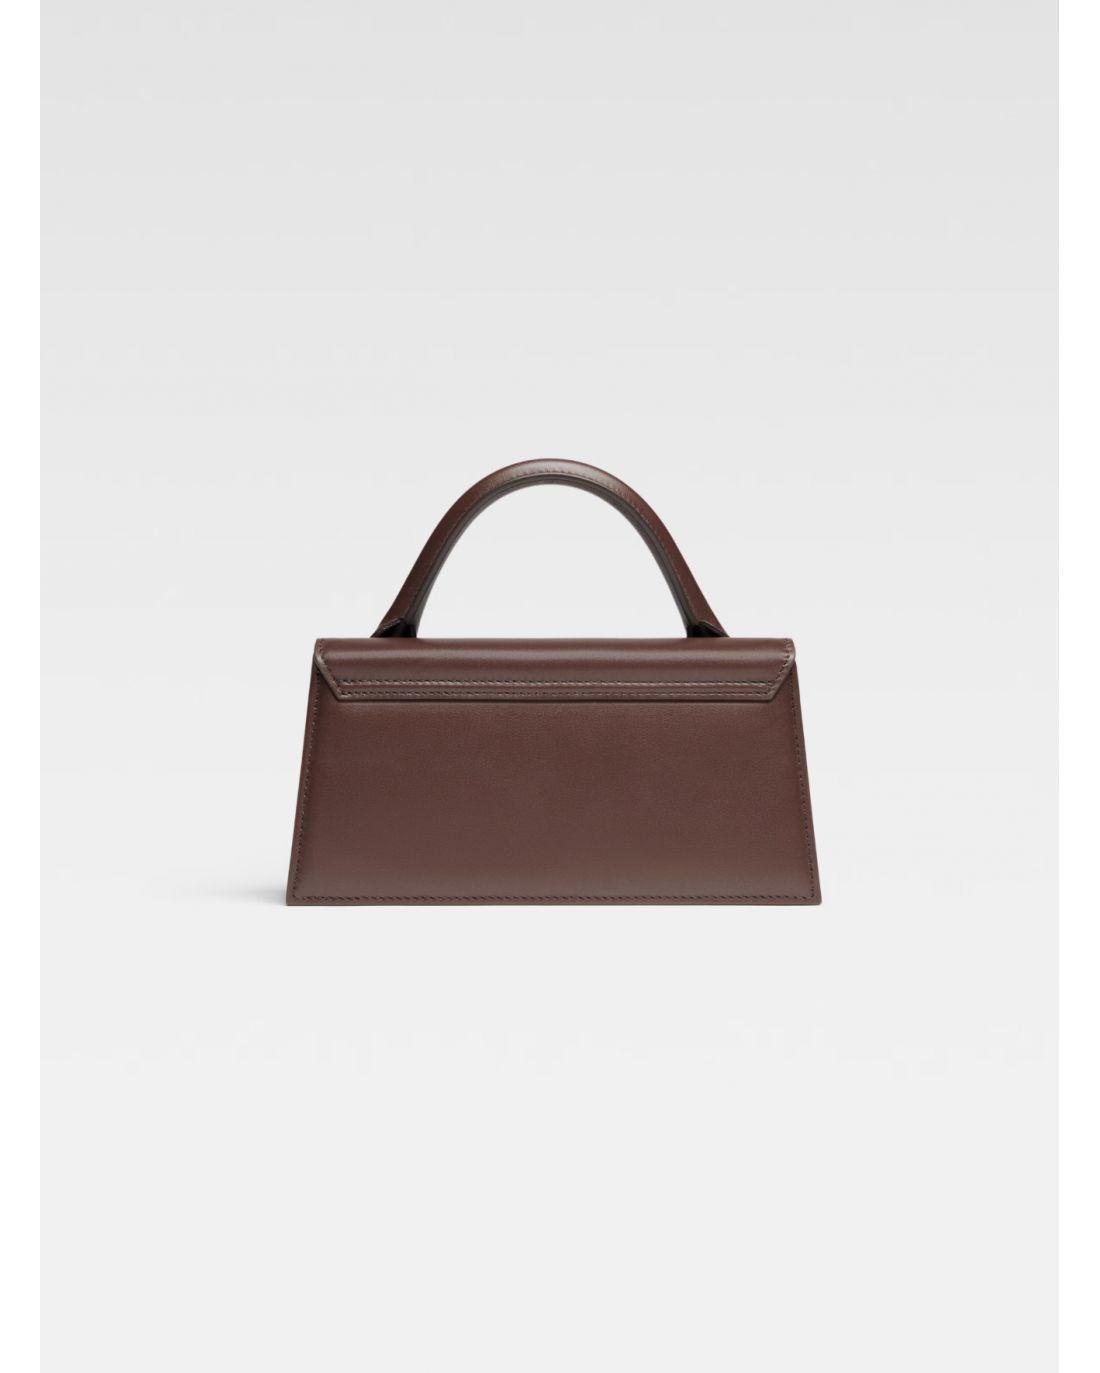 Le Chiquito long midnight brown - Jacquemus